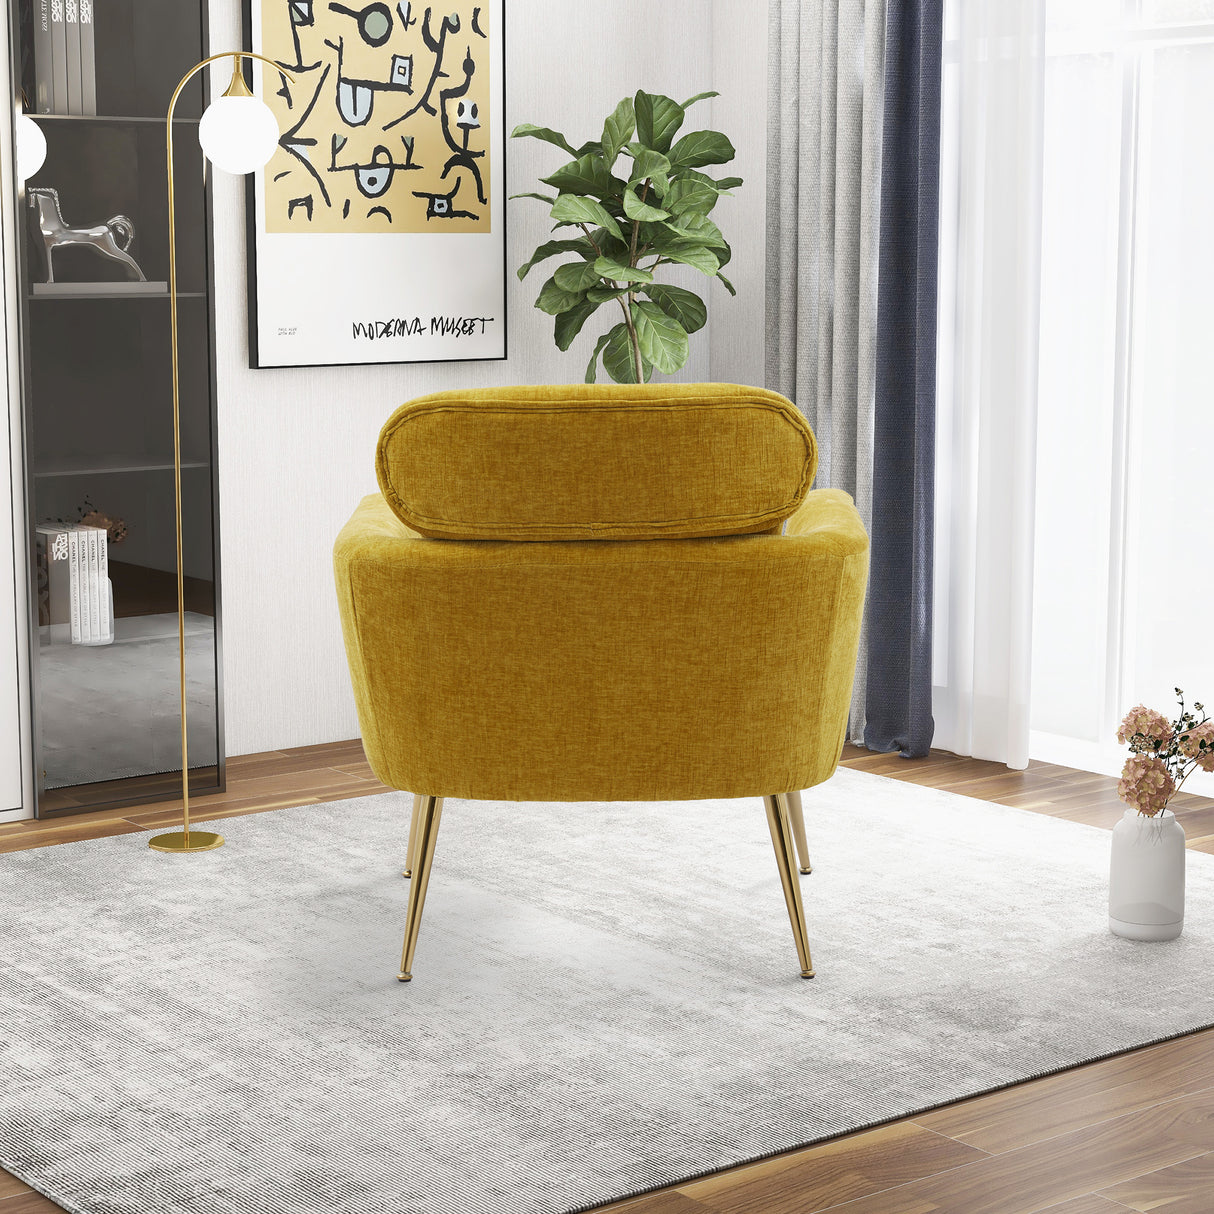 29.5"W Modern Chenille Accent Chair Armchair Upholstered Reading Chair Single Sofa Leisure Club Chair with Gold Metal Leg and Throw Pillow for Living Room Bedroom Dorm Room Office, Mustard Chenille - Home Elegance USA